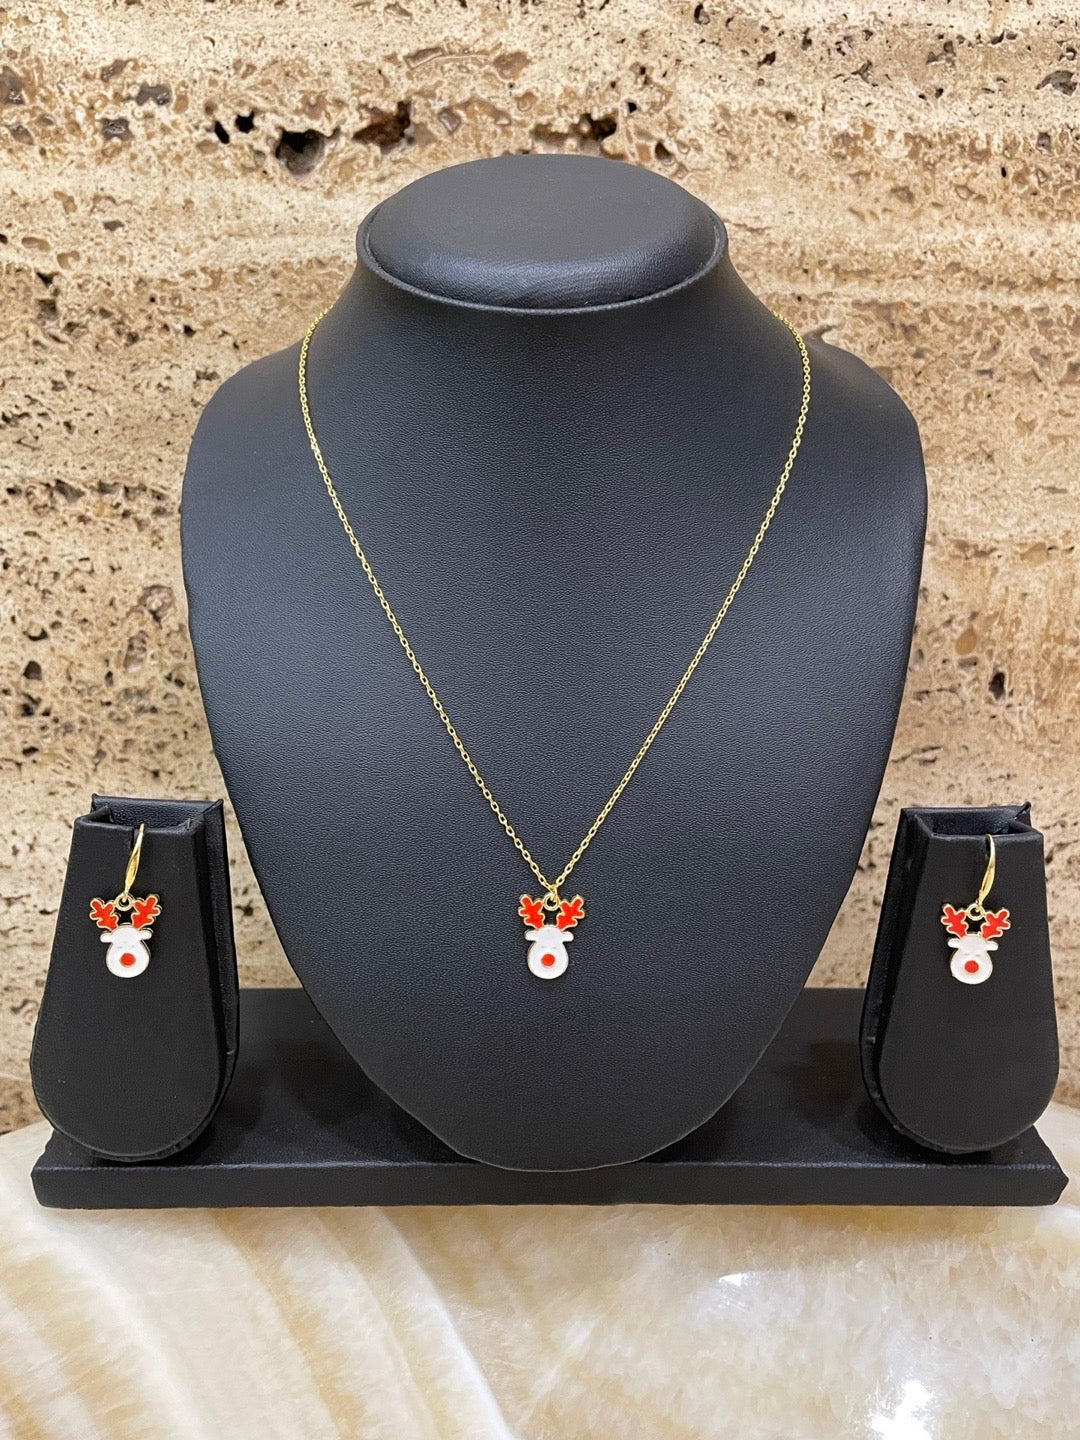 Buy Red Bauble Pendant Necklace Online - Accessorize India